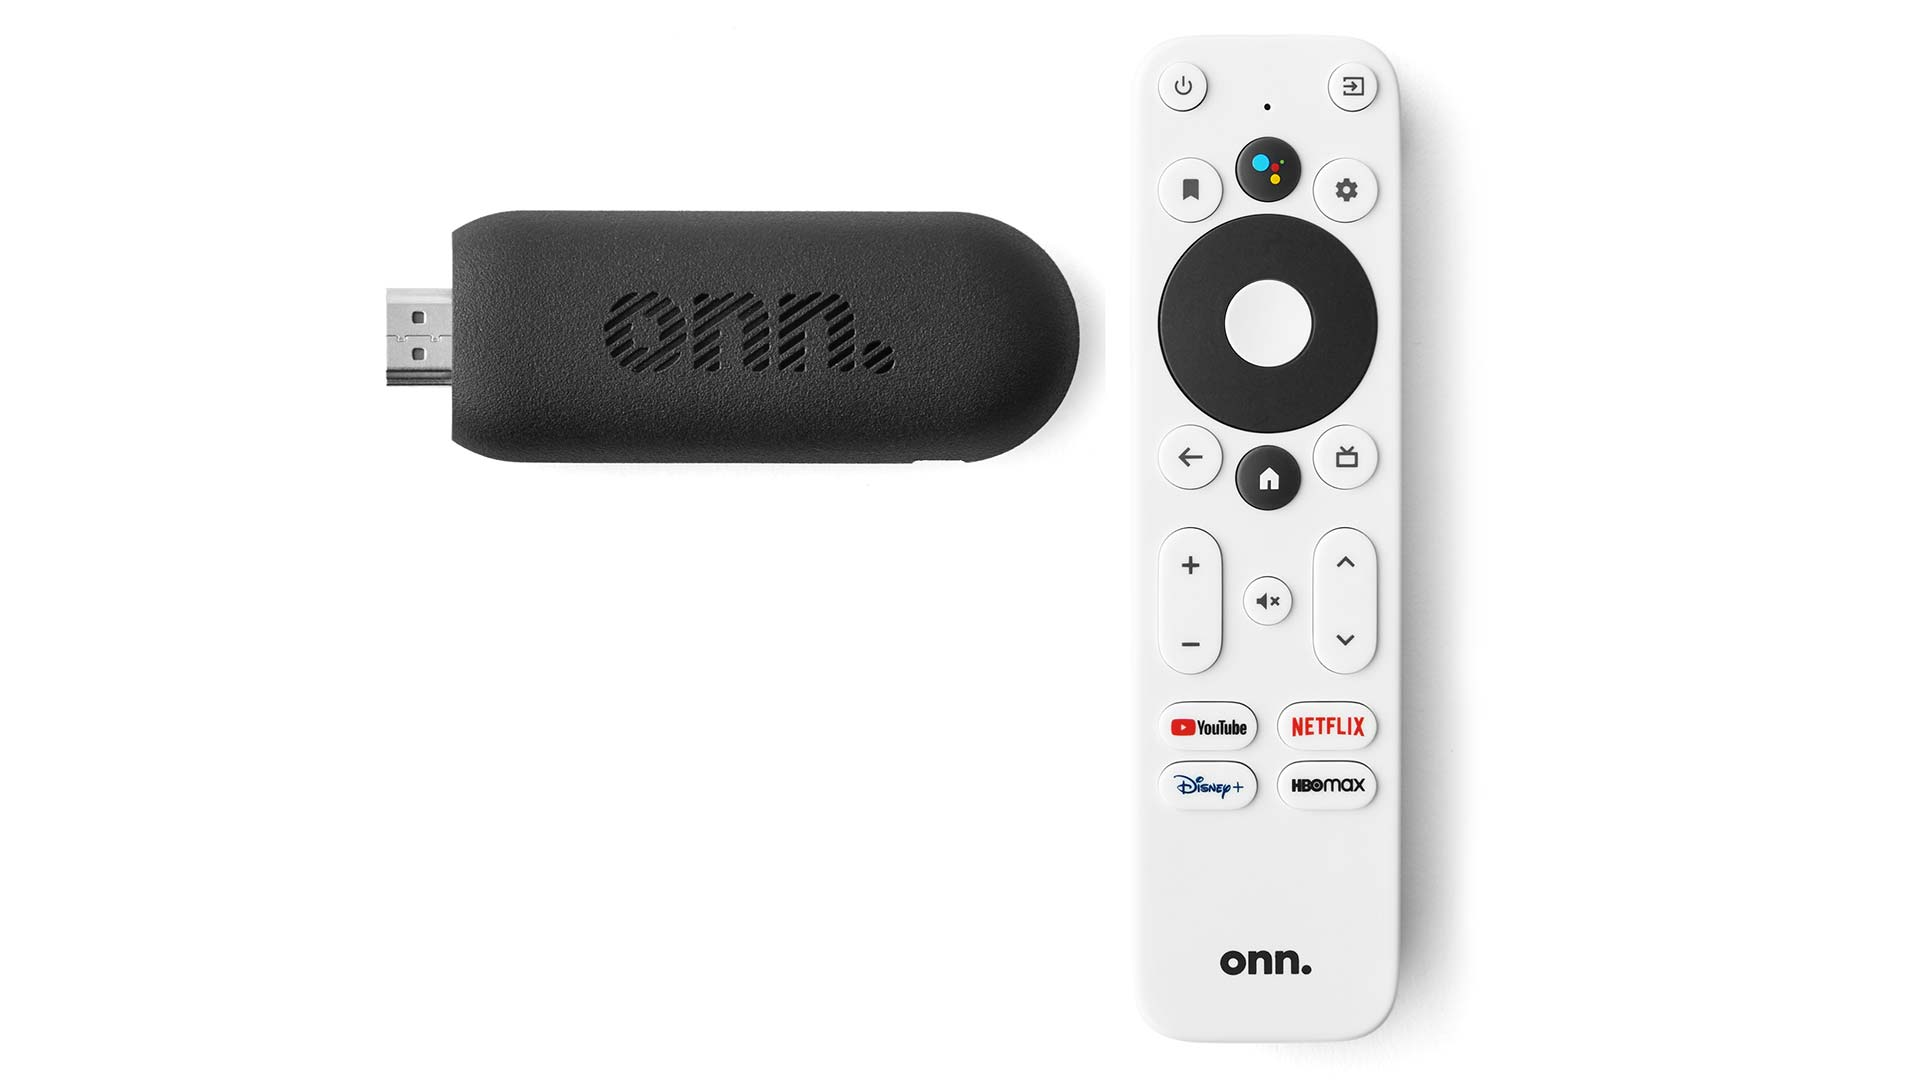 Onn Streaming Stick Pairing your Onn streaming stick remote is an essential stage that gives you the authority to control your gadget.